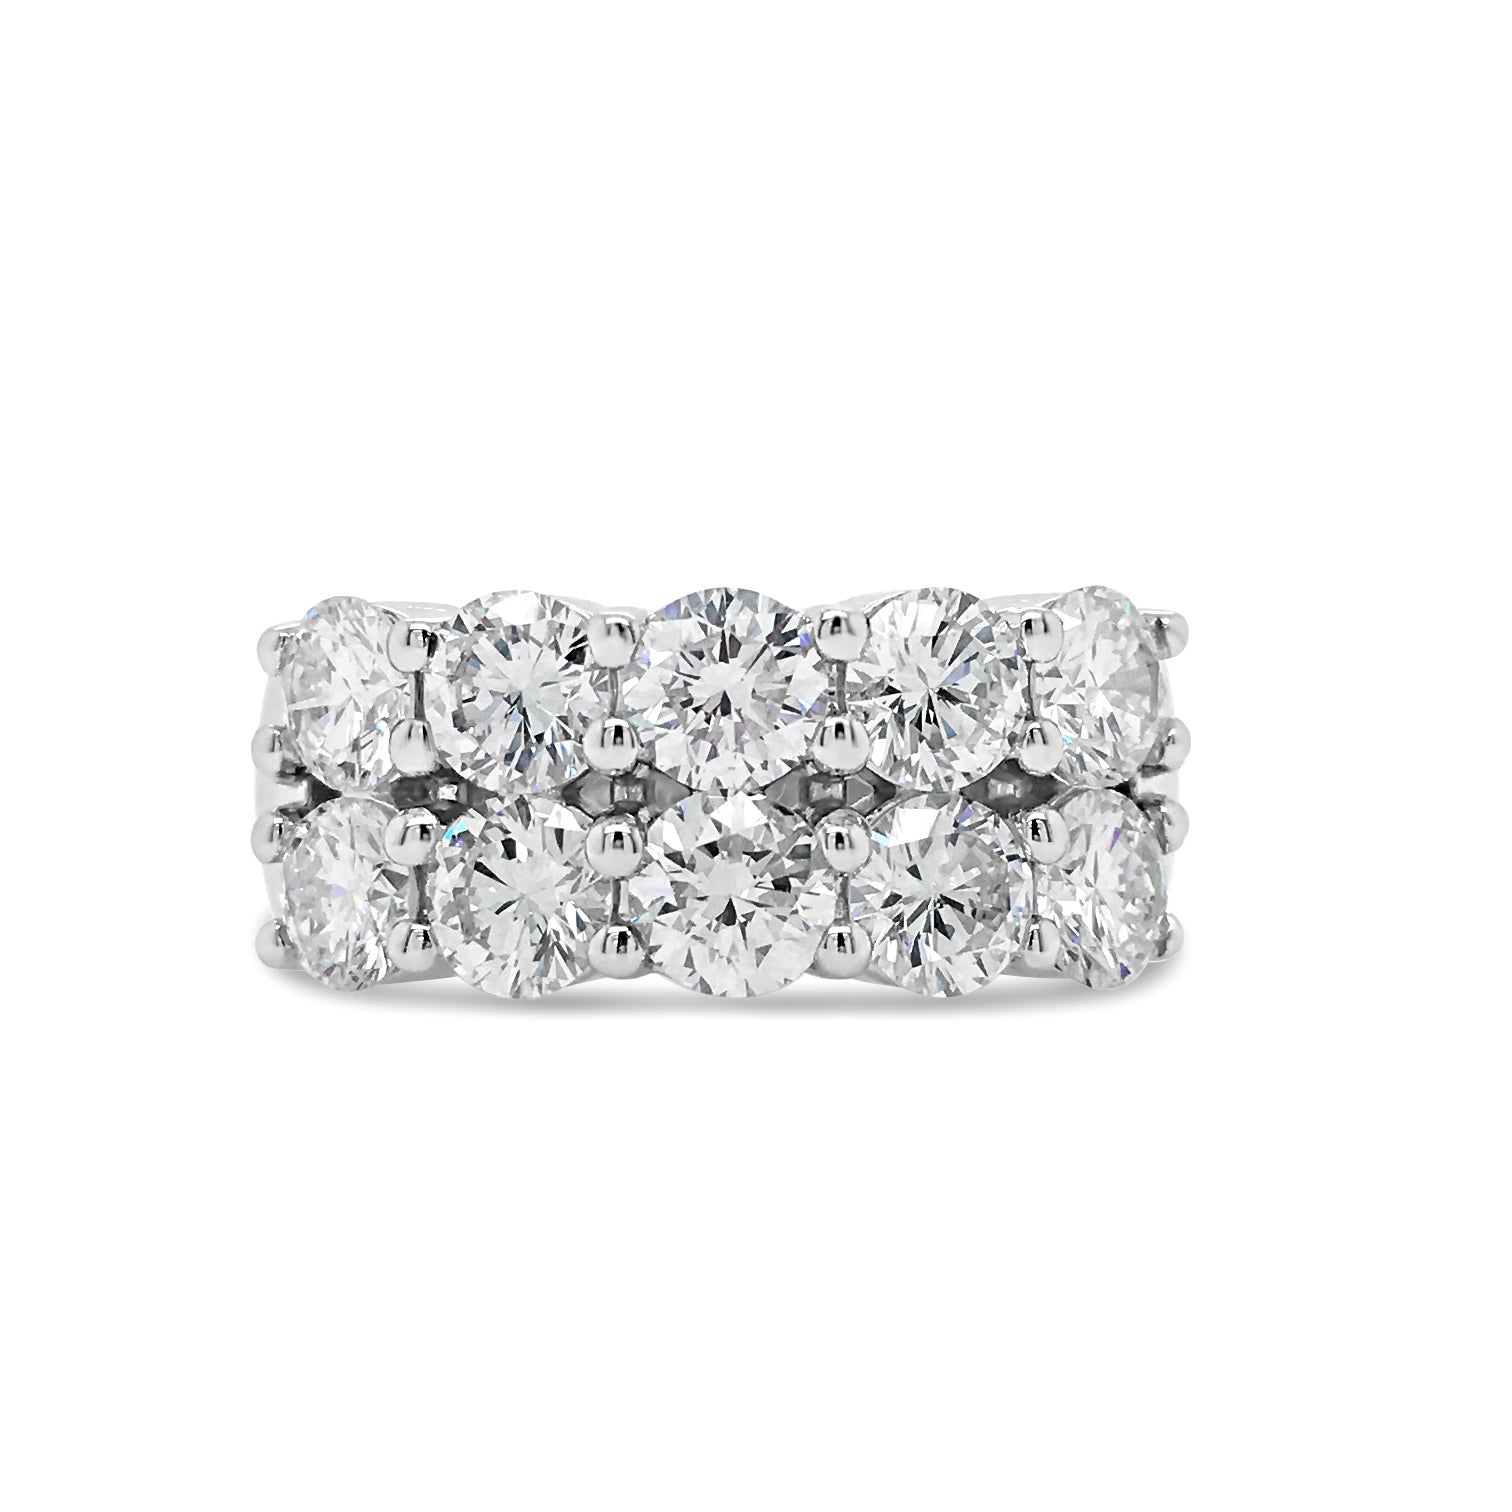 Double Row Diamond Band Ring  -14k gold weighing 9.1 grams  -10 round shared prong-set diamonds weighing 3.07 carats F-G VS